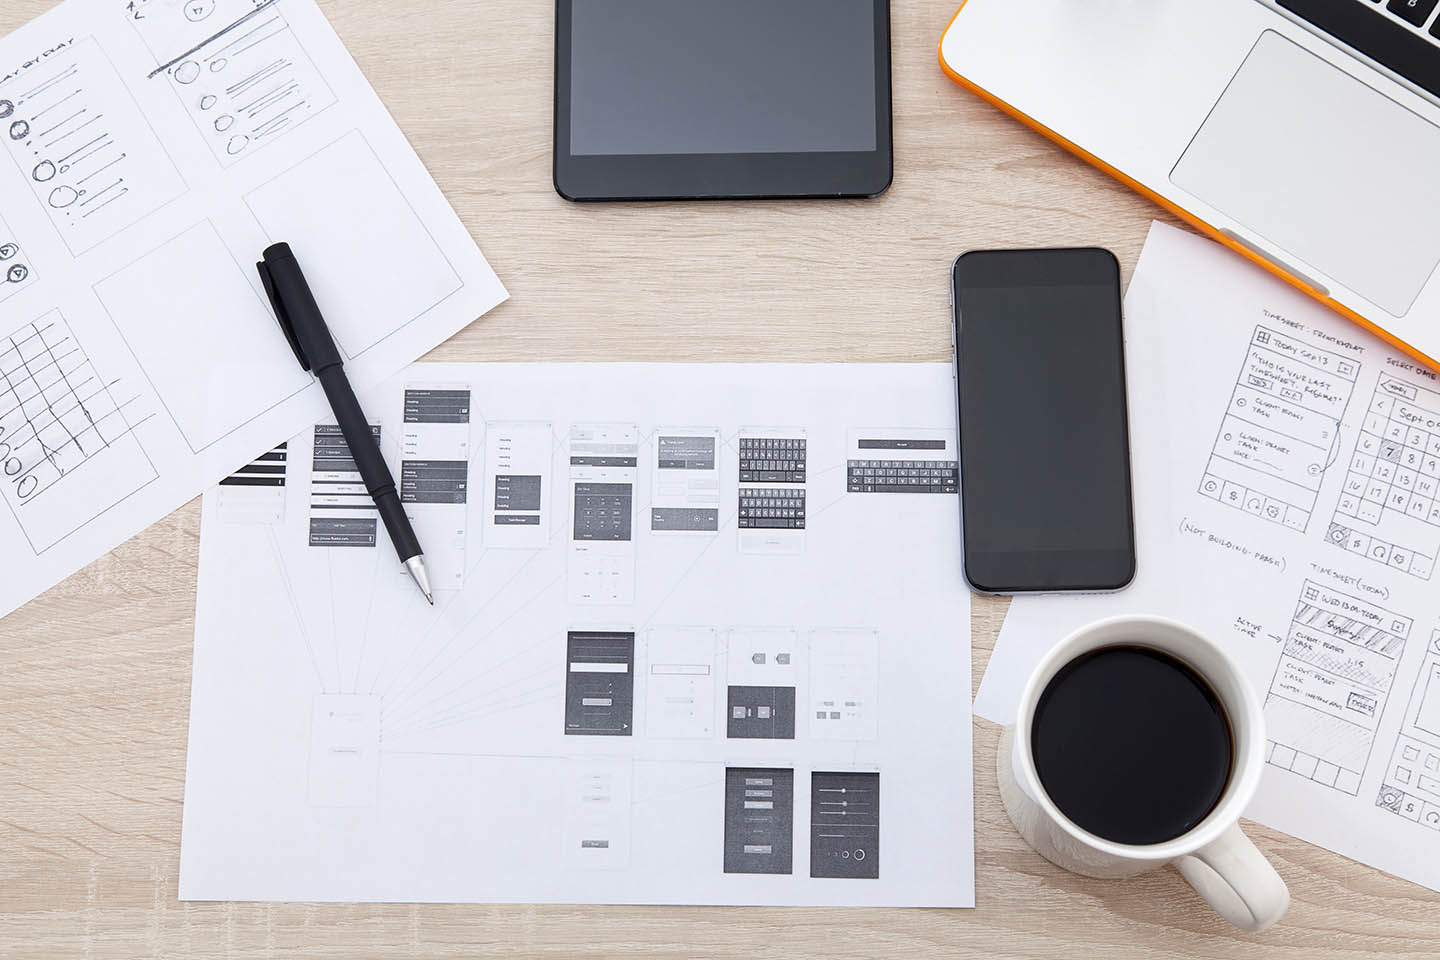 Wireframes – An important stage in app development.